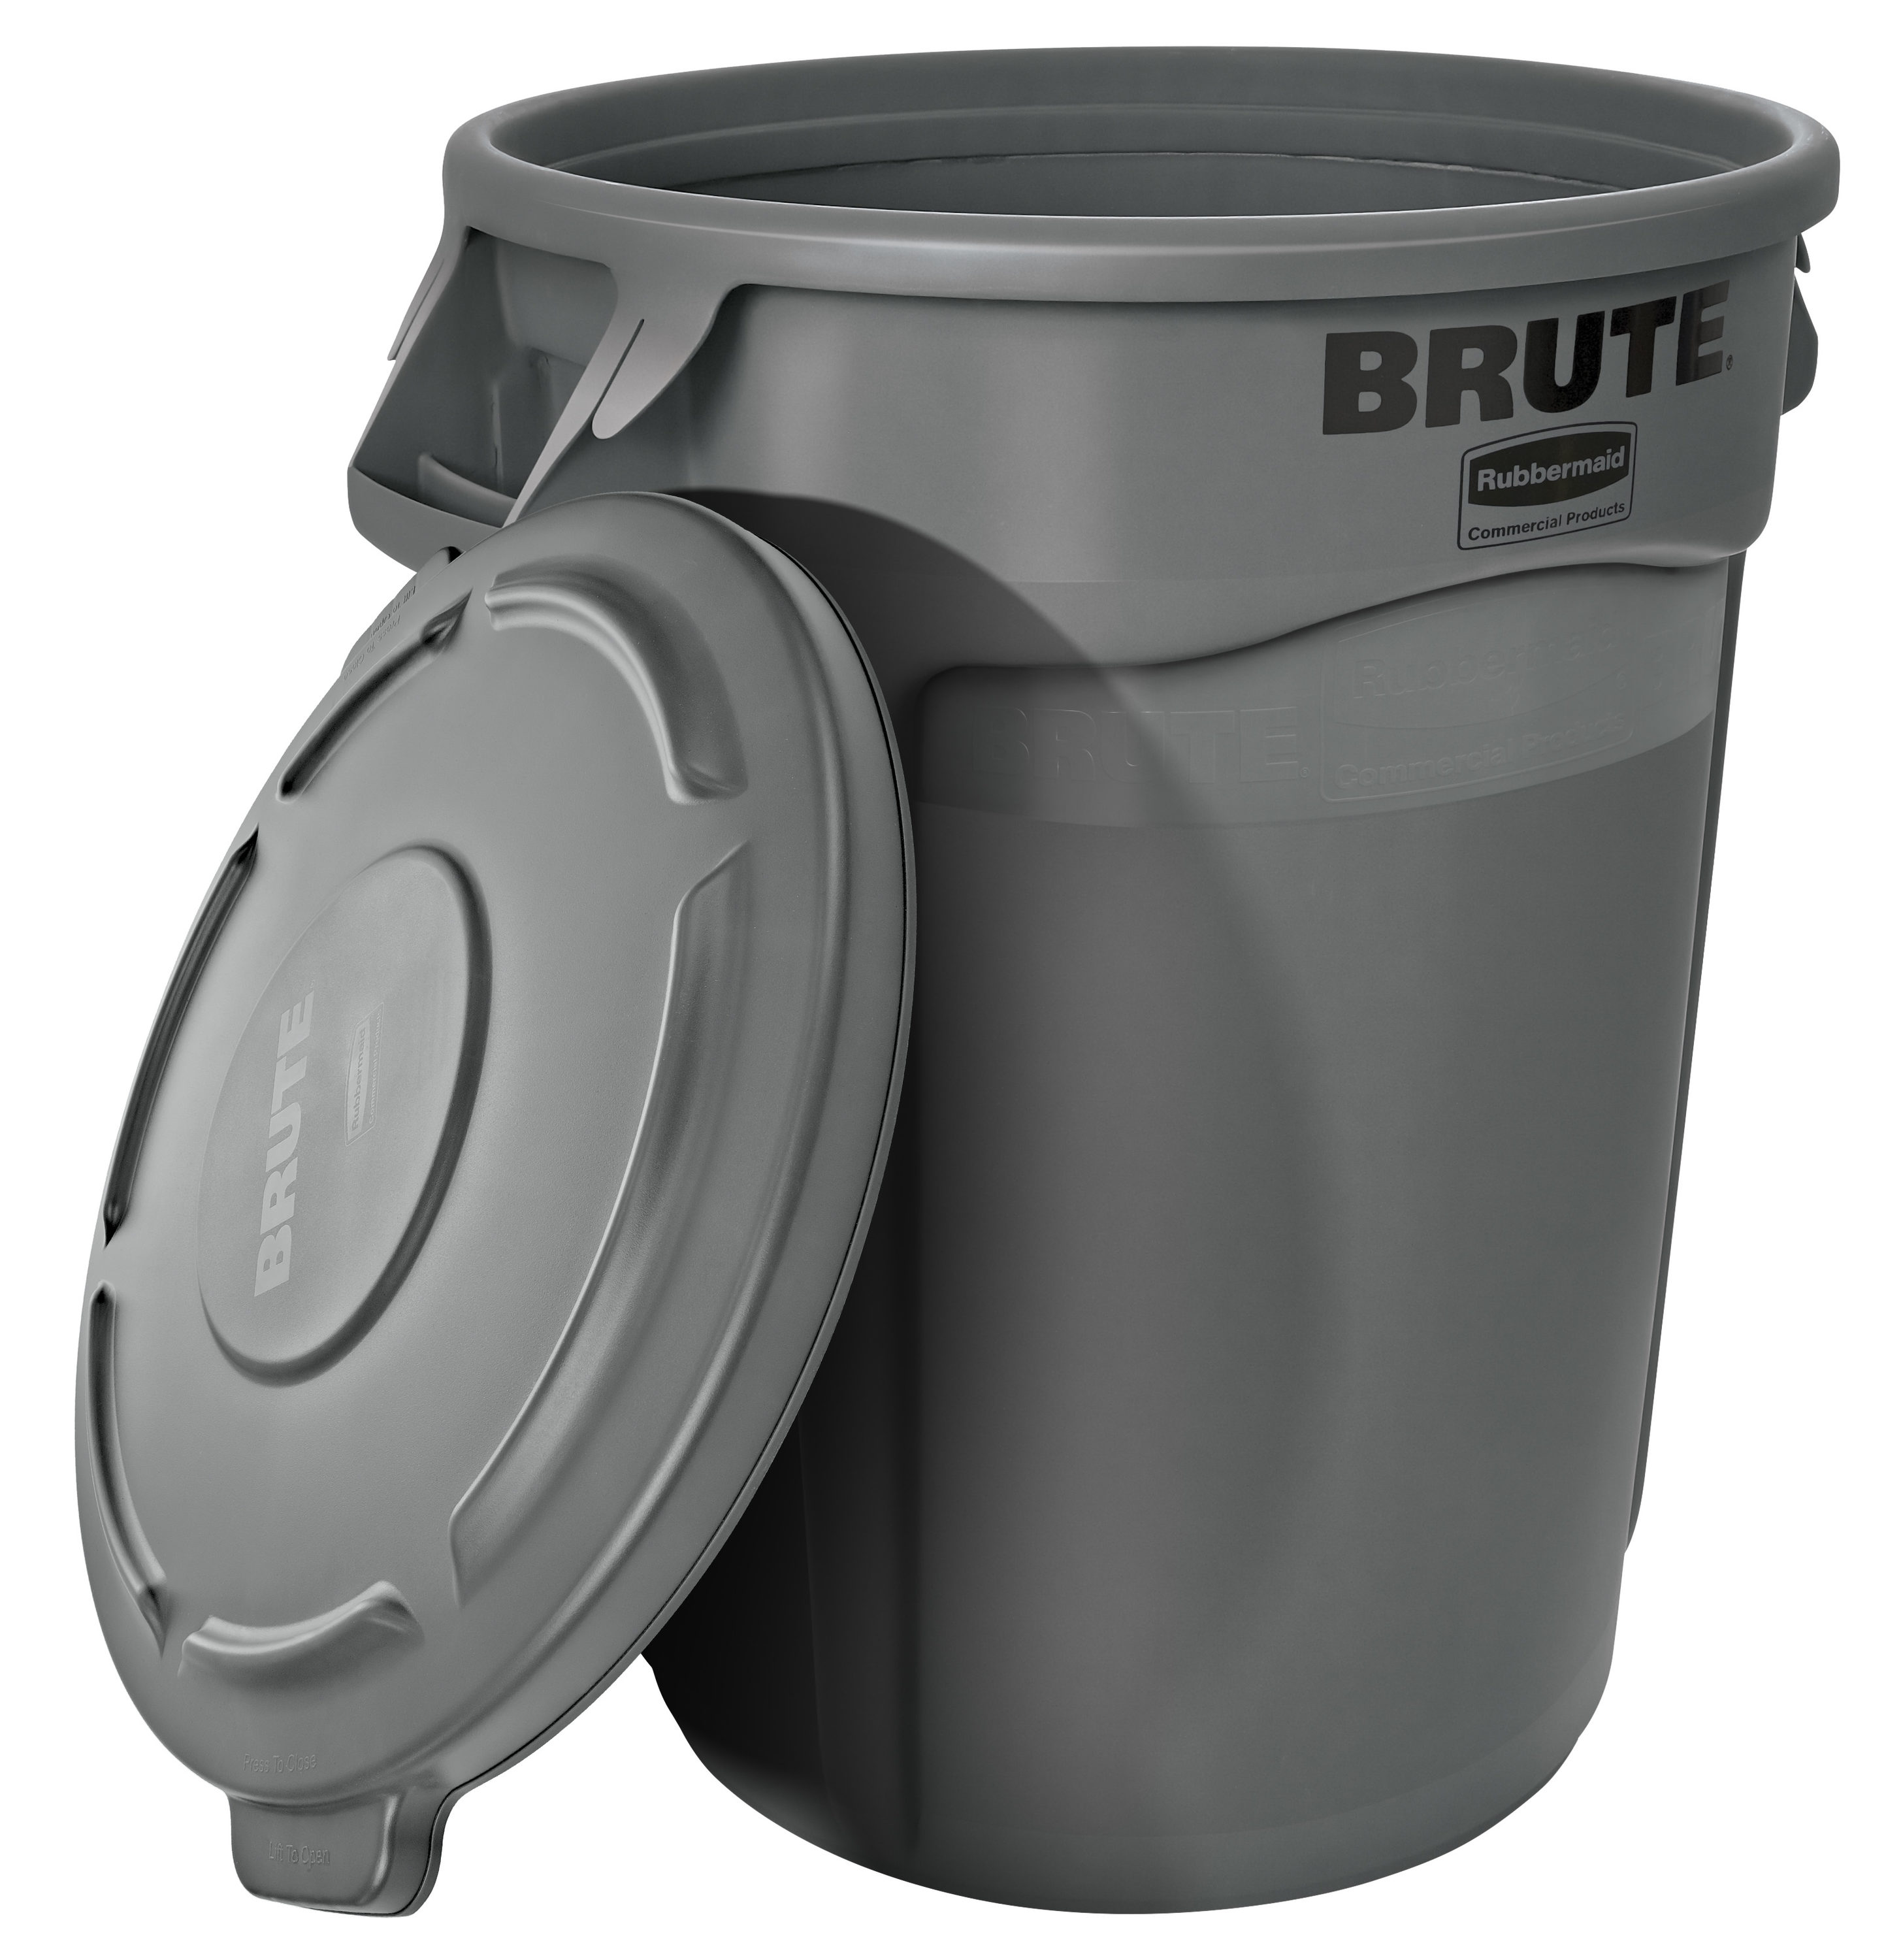 Rubbermaid Commercial Products FG263200GRAY Brute Container with Venting Channels Gray 32 gal